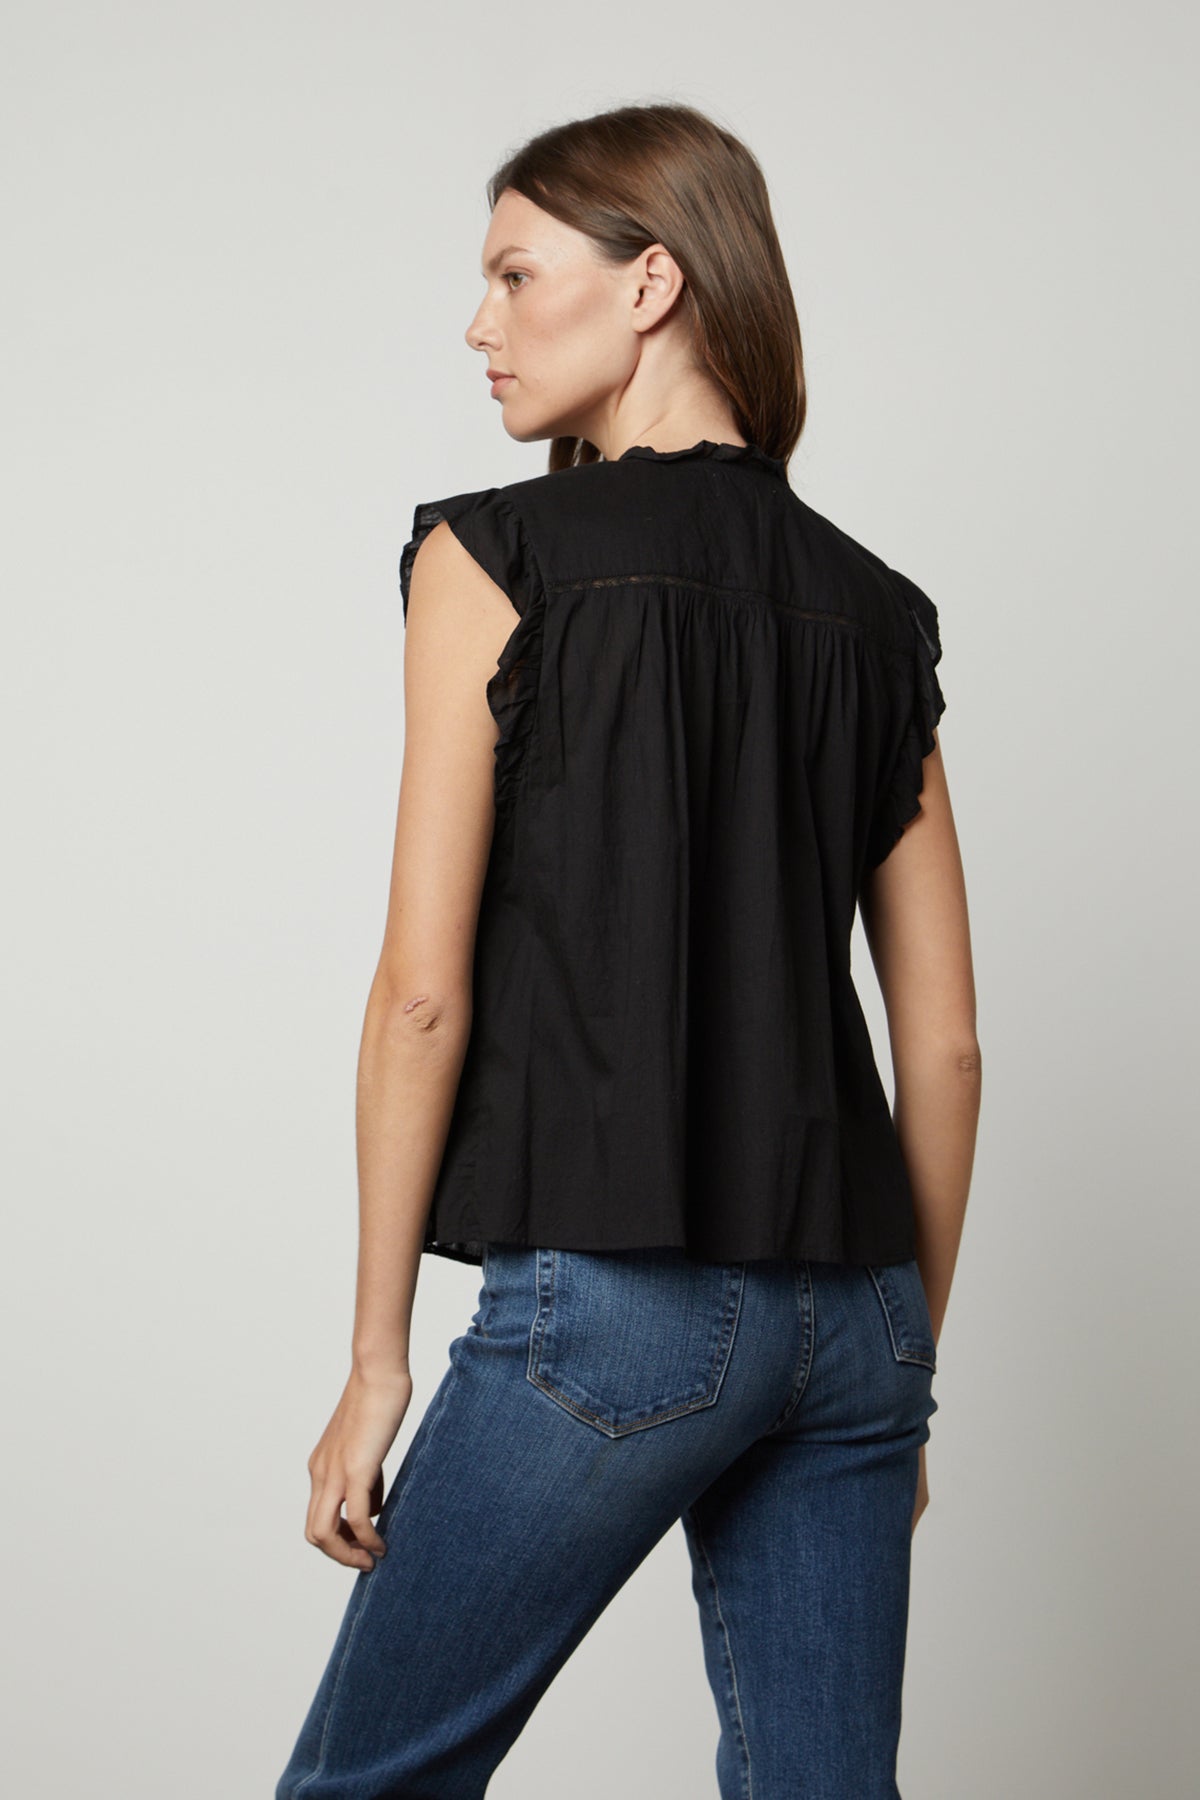   The back view of a woman wearing a Velvet by Graham & Spencer LIANA LACE TANK TOP and jeans. 